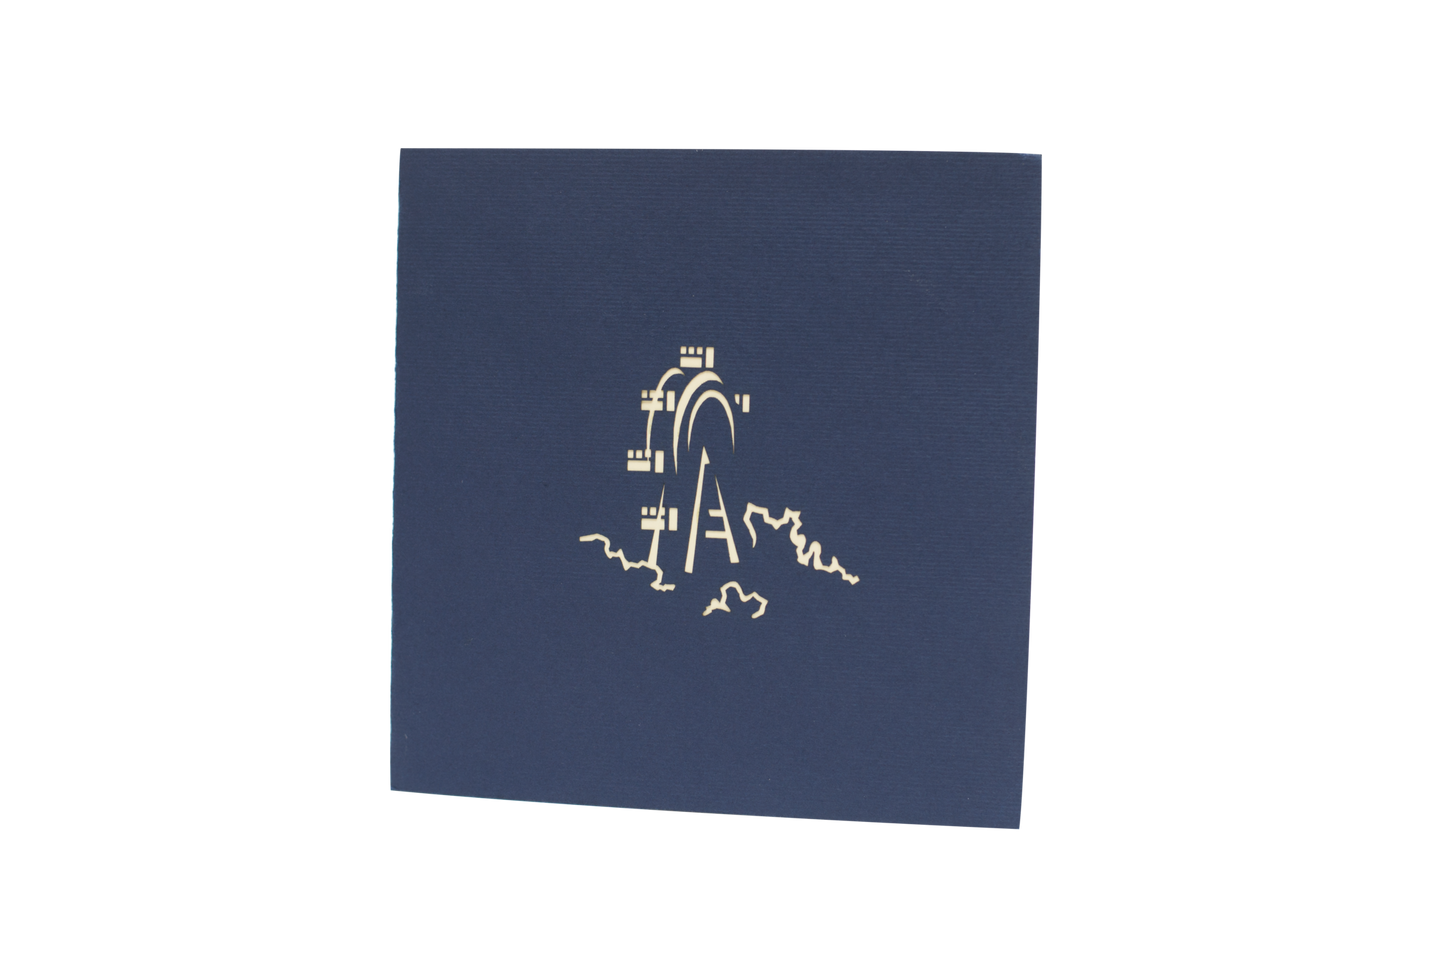 Dark blue card with Ferris wheel etched in white